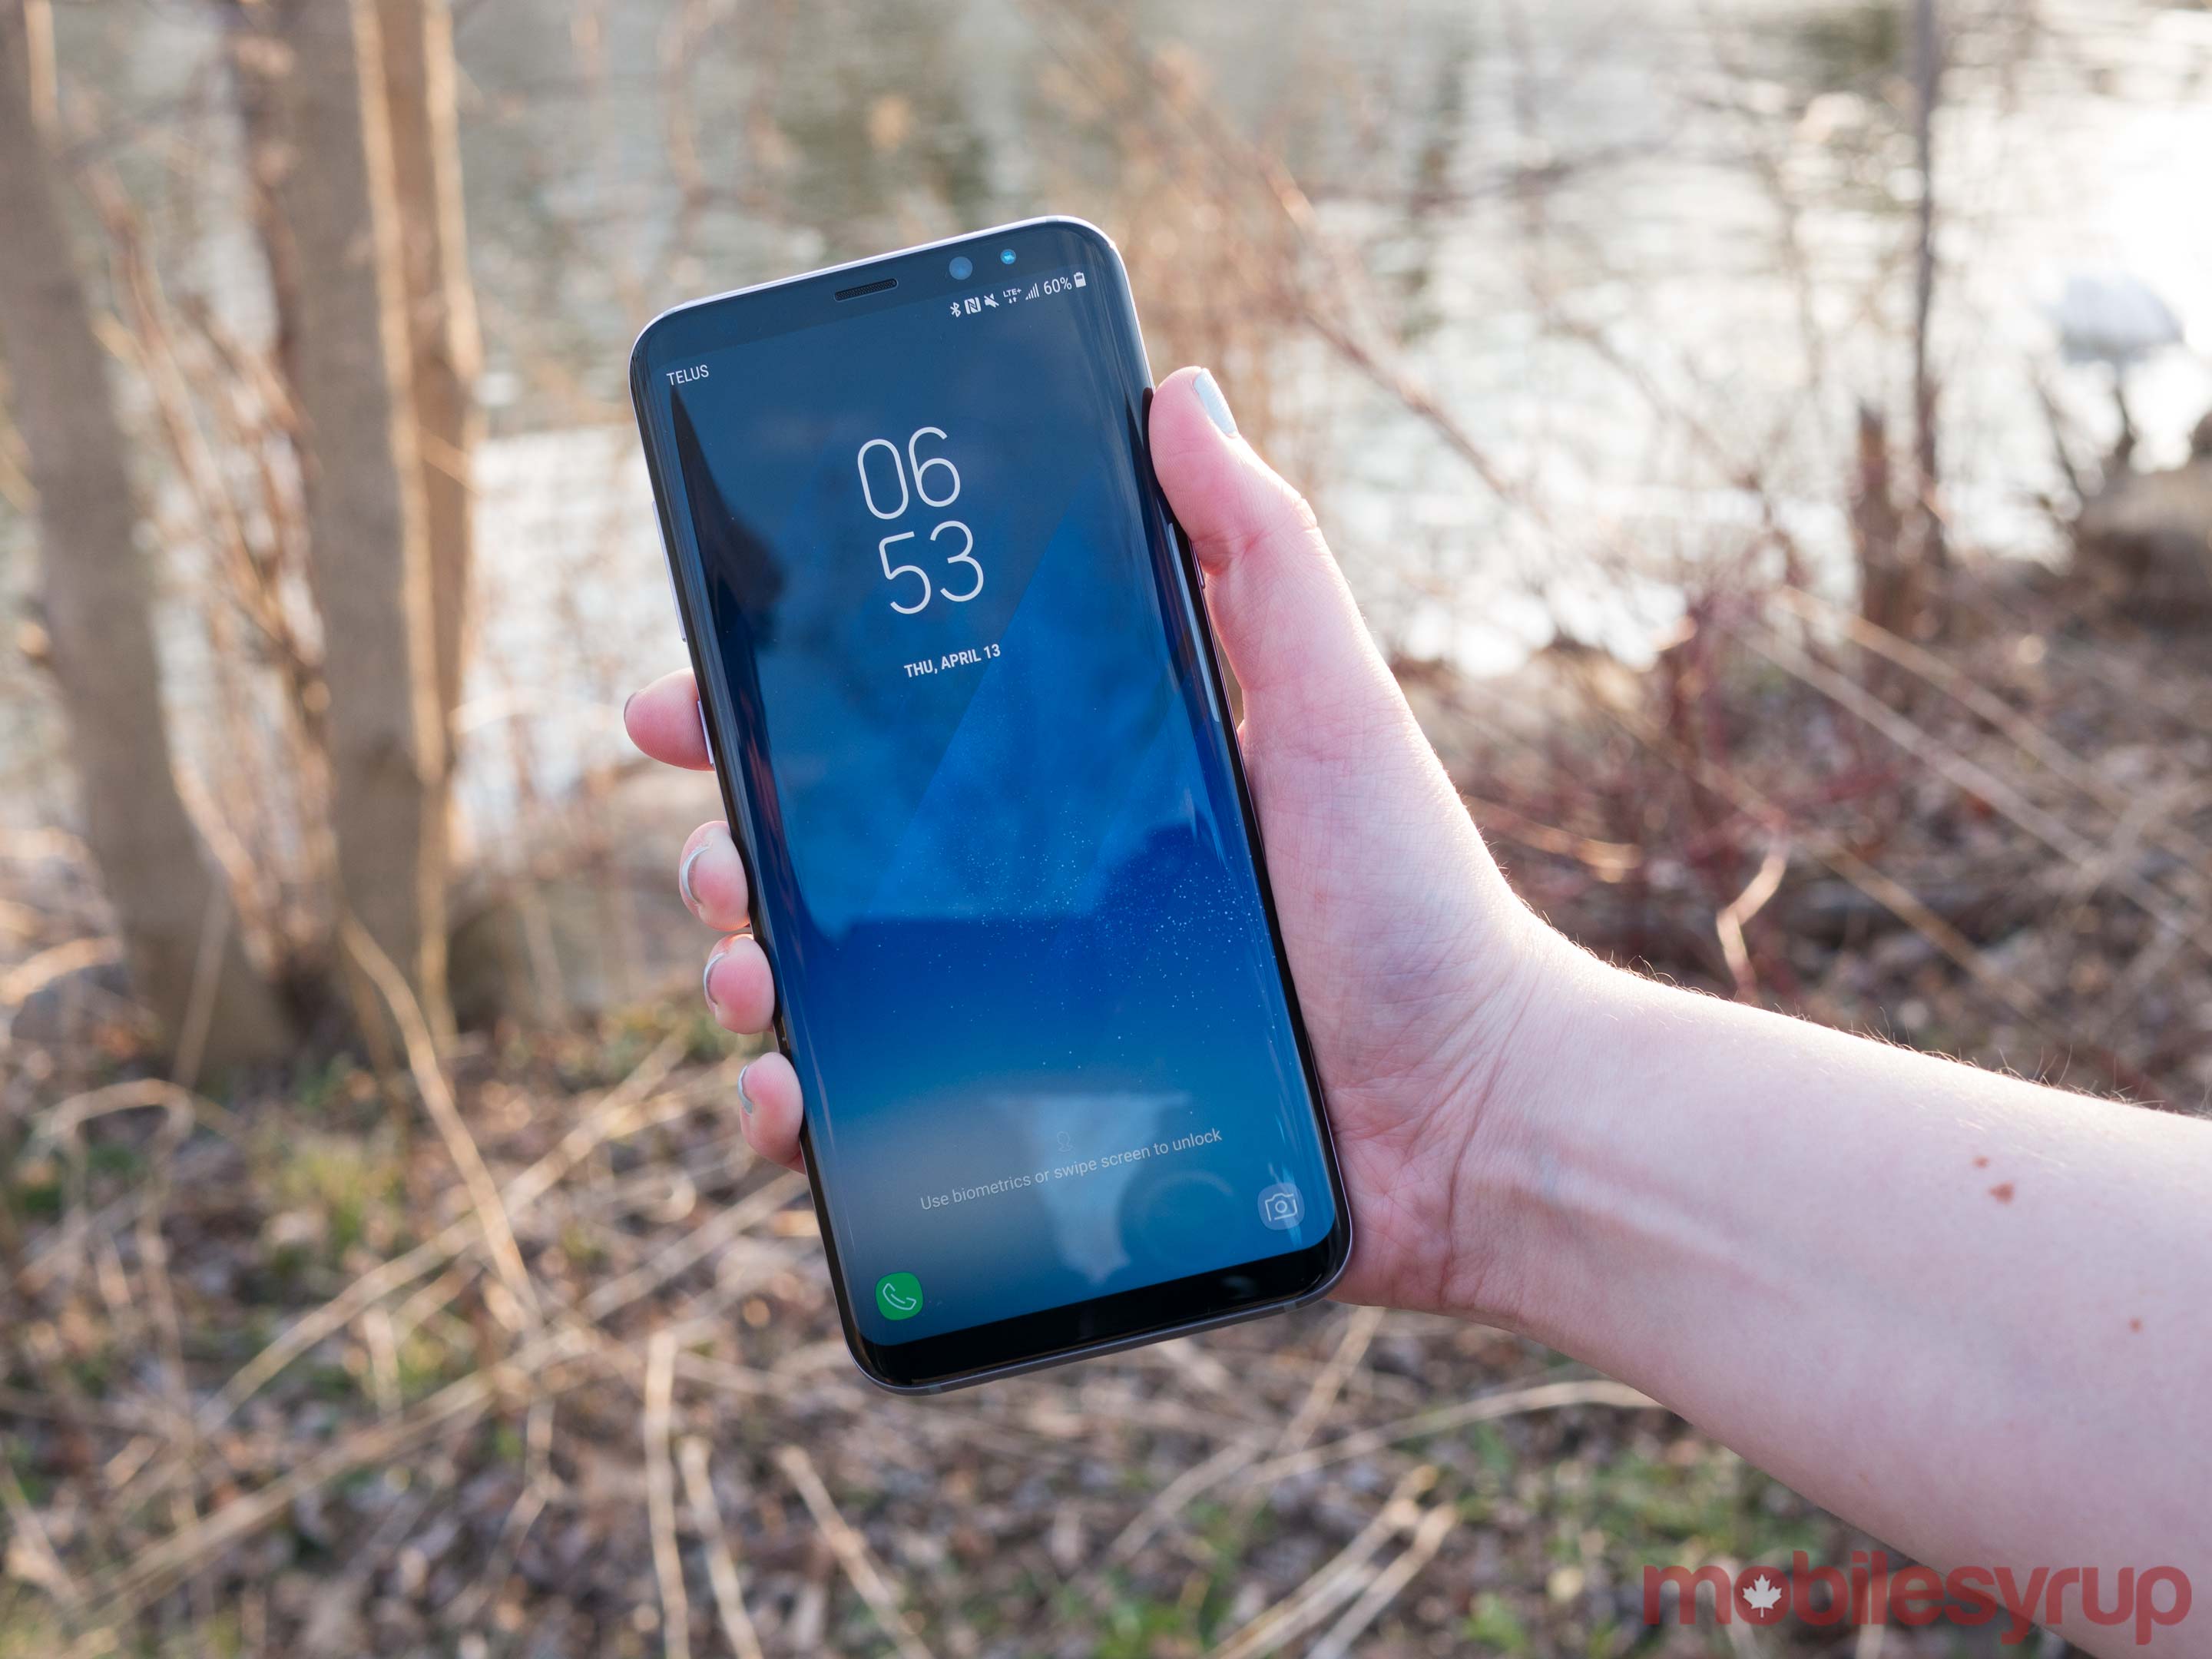 Galaxy S8+ facing the front in hand